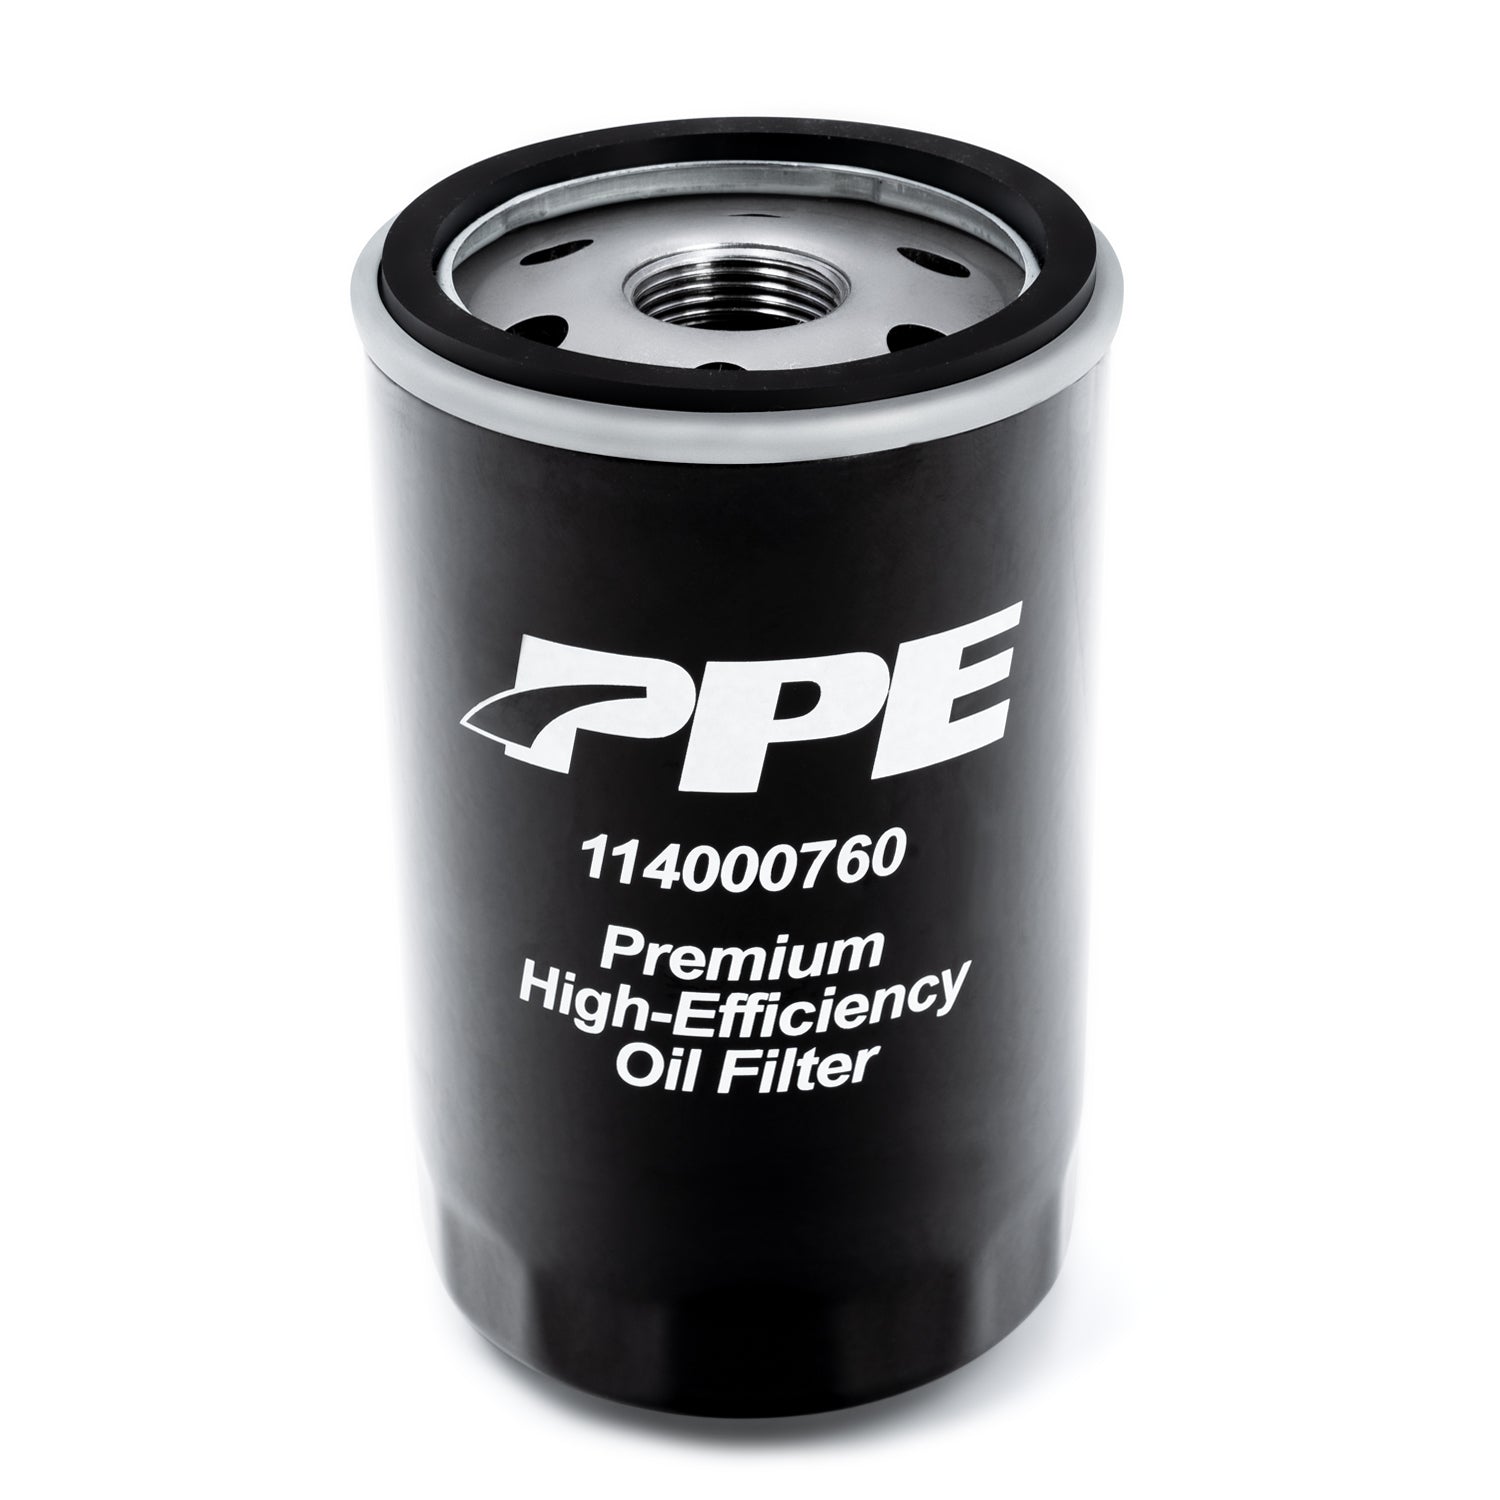 PPE Diesel Premium High-Efficiency Engine Oil Filter Replaces PF48 PF63 FL500S MO339 114000760